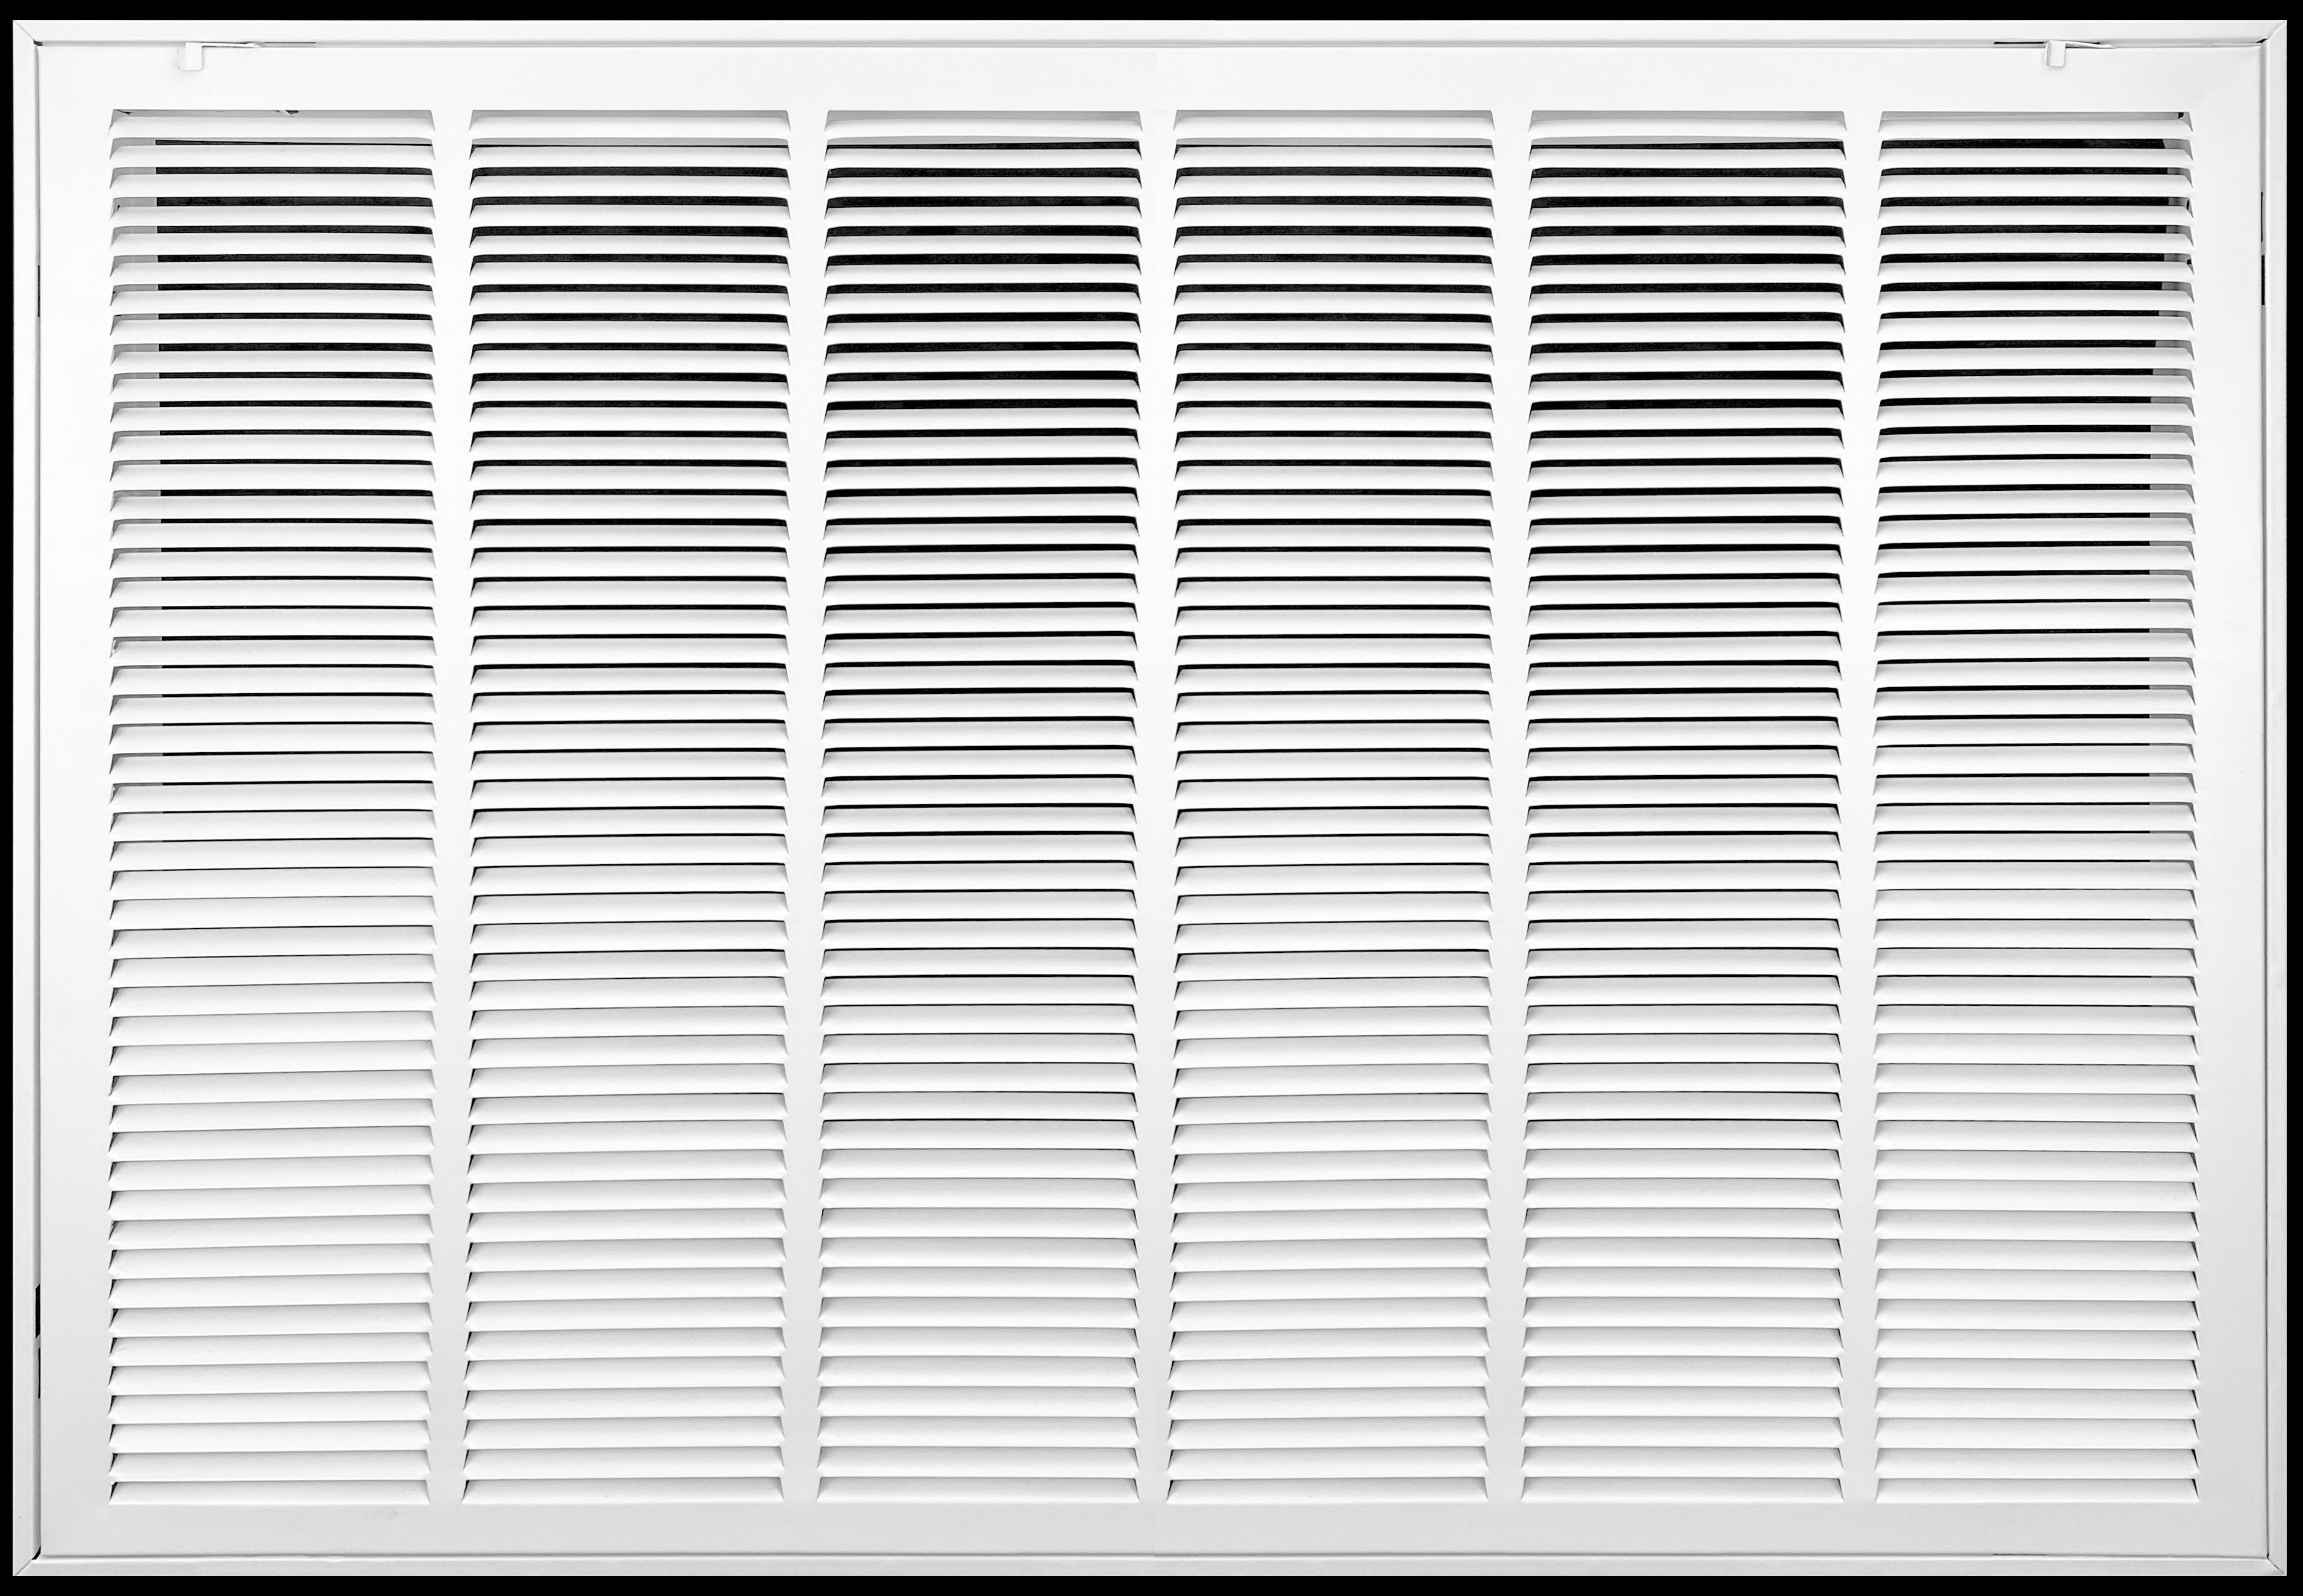 airgrilles 30" x 20" duct opening steel return air filter grille for sidewall and ceiling hnd-rafg1-wh-30x20 b07p8g1xw7 1